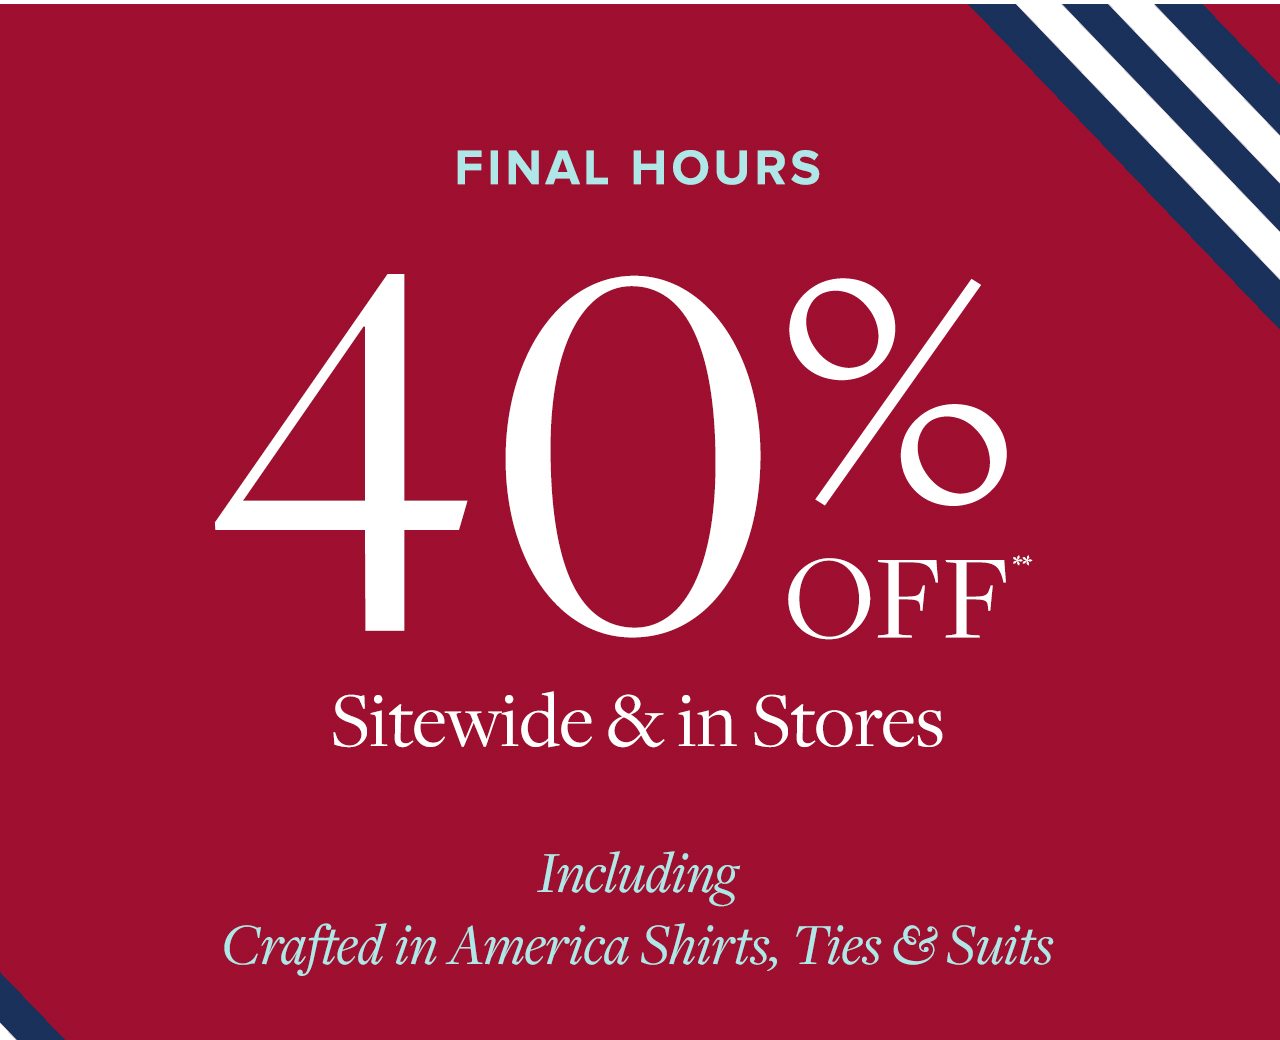 Ends Today 40% Off Sitewide and in Stores Including Crafted in America Shirts, Ties and Suits